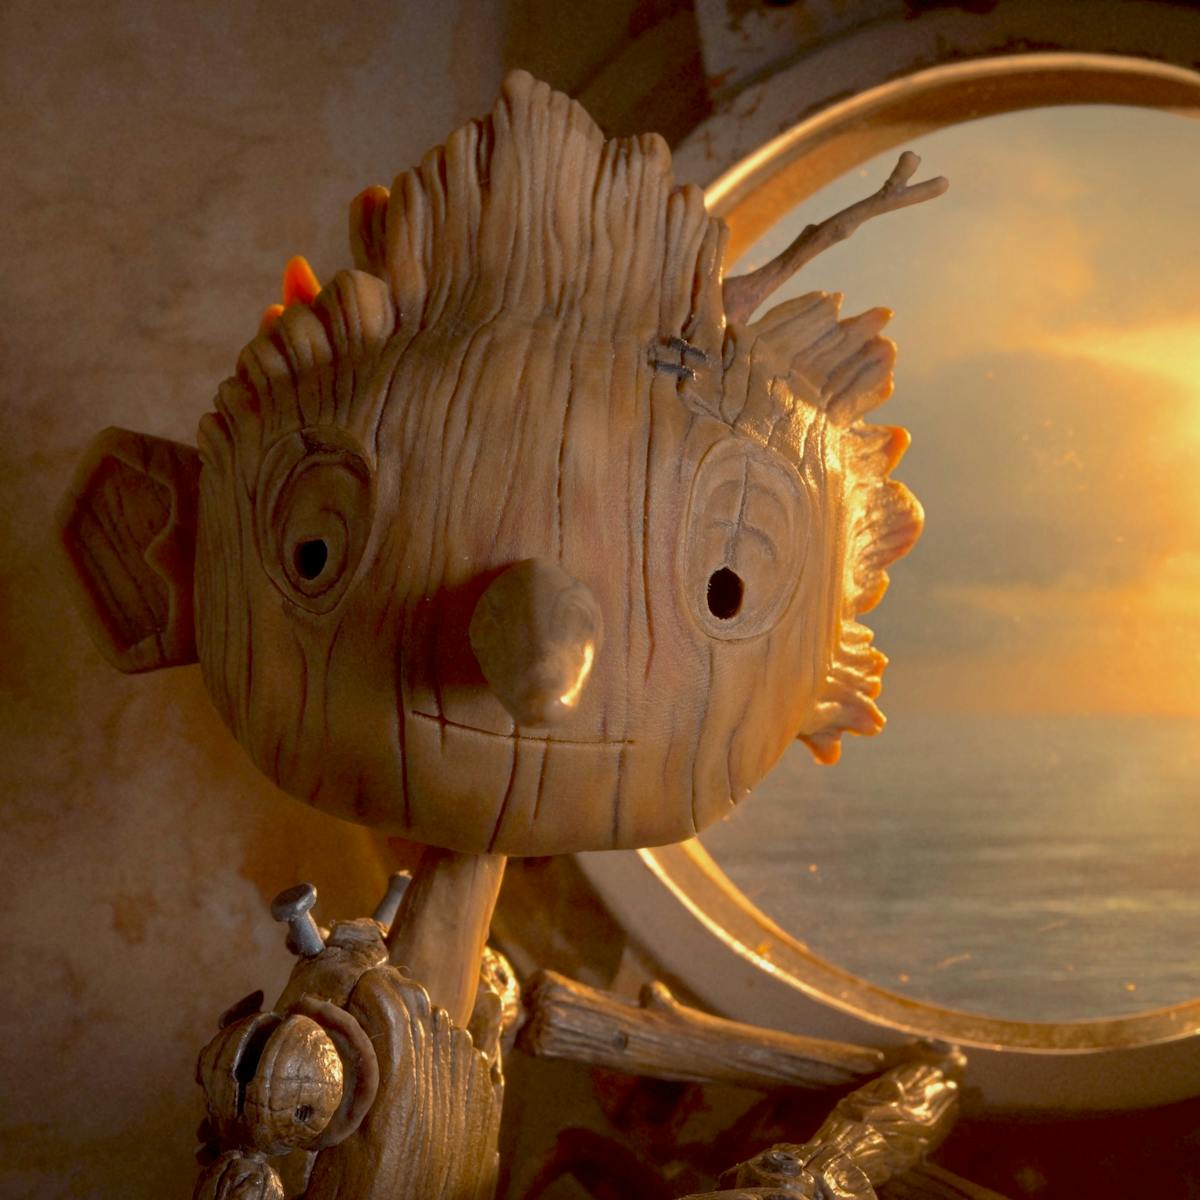 Pinocchio (Gregory Mann) looks out of a circular window at the ocean and an orange setting sun. 